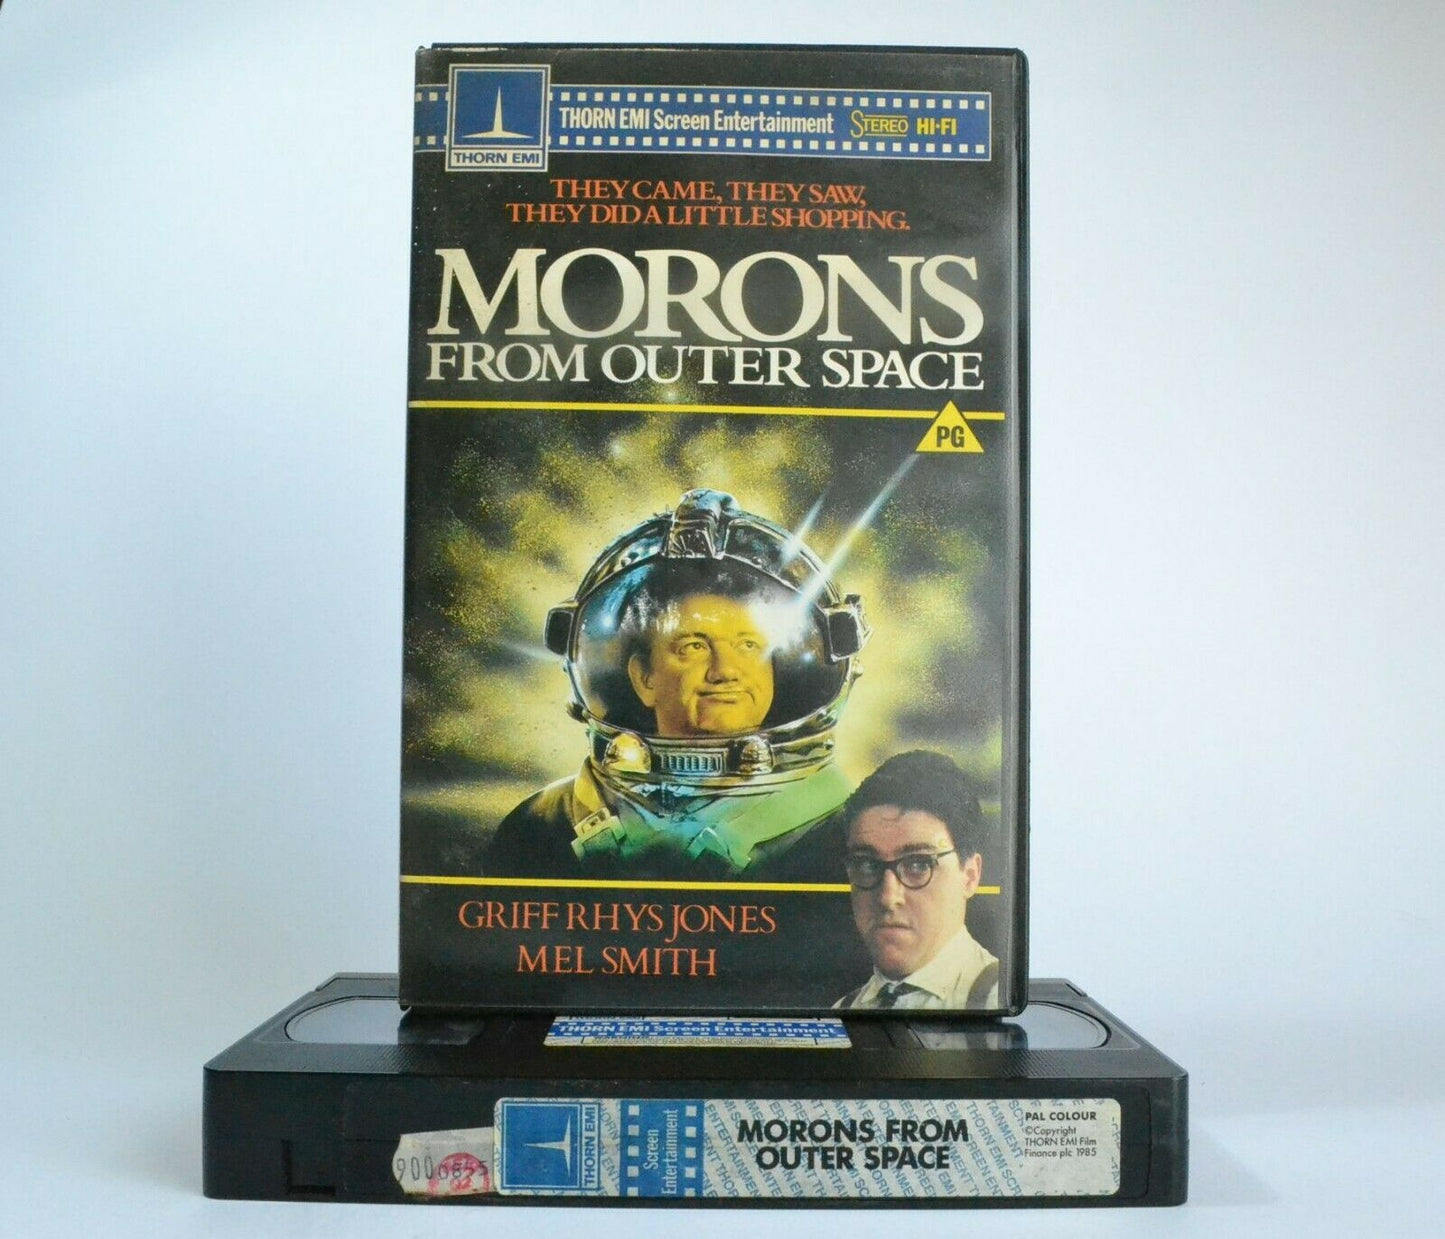 Morons From Outer Space (1985): A Mike Hodges Film - British Sci-Fi/Comedy - VHS-